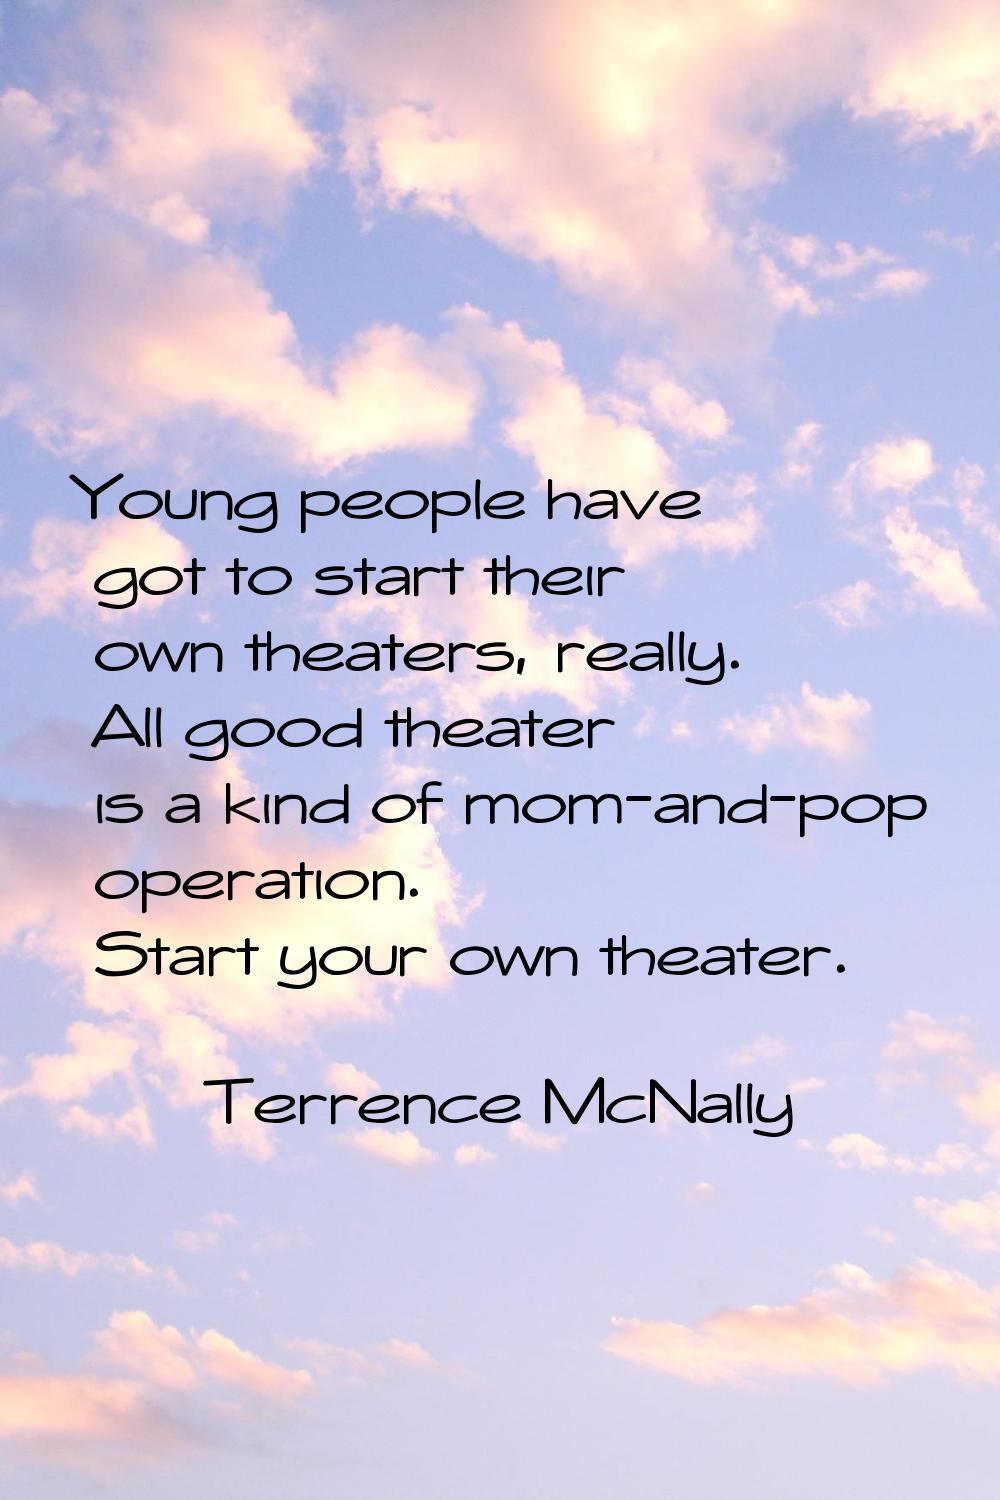 Young people have got to start their own theaters, really. All good theater is a kind of mom-and-po